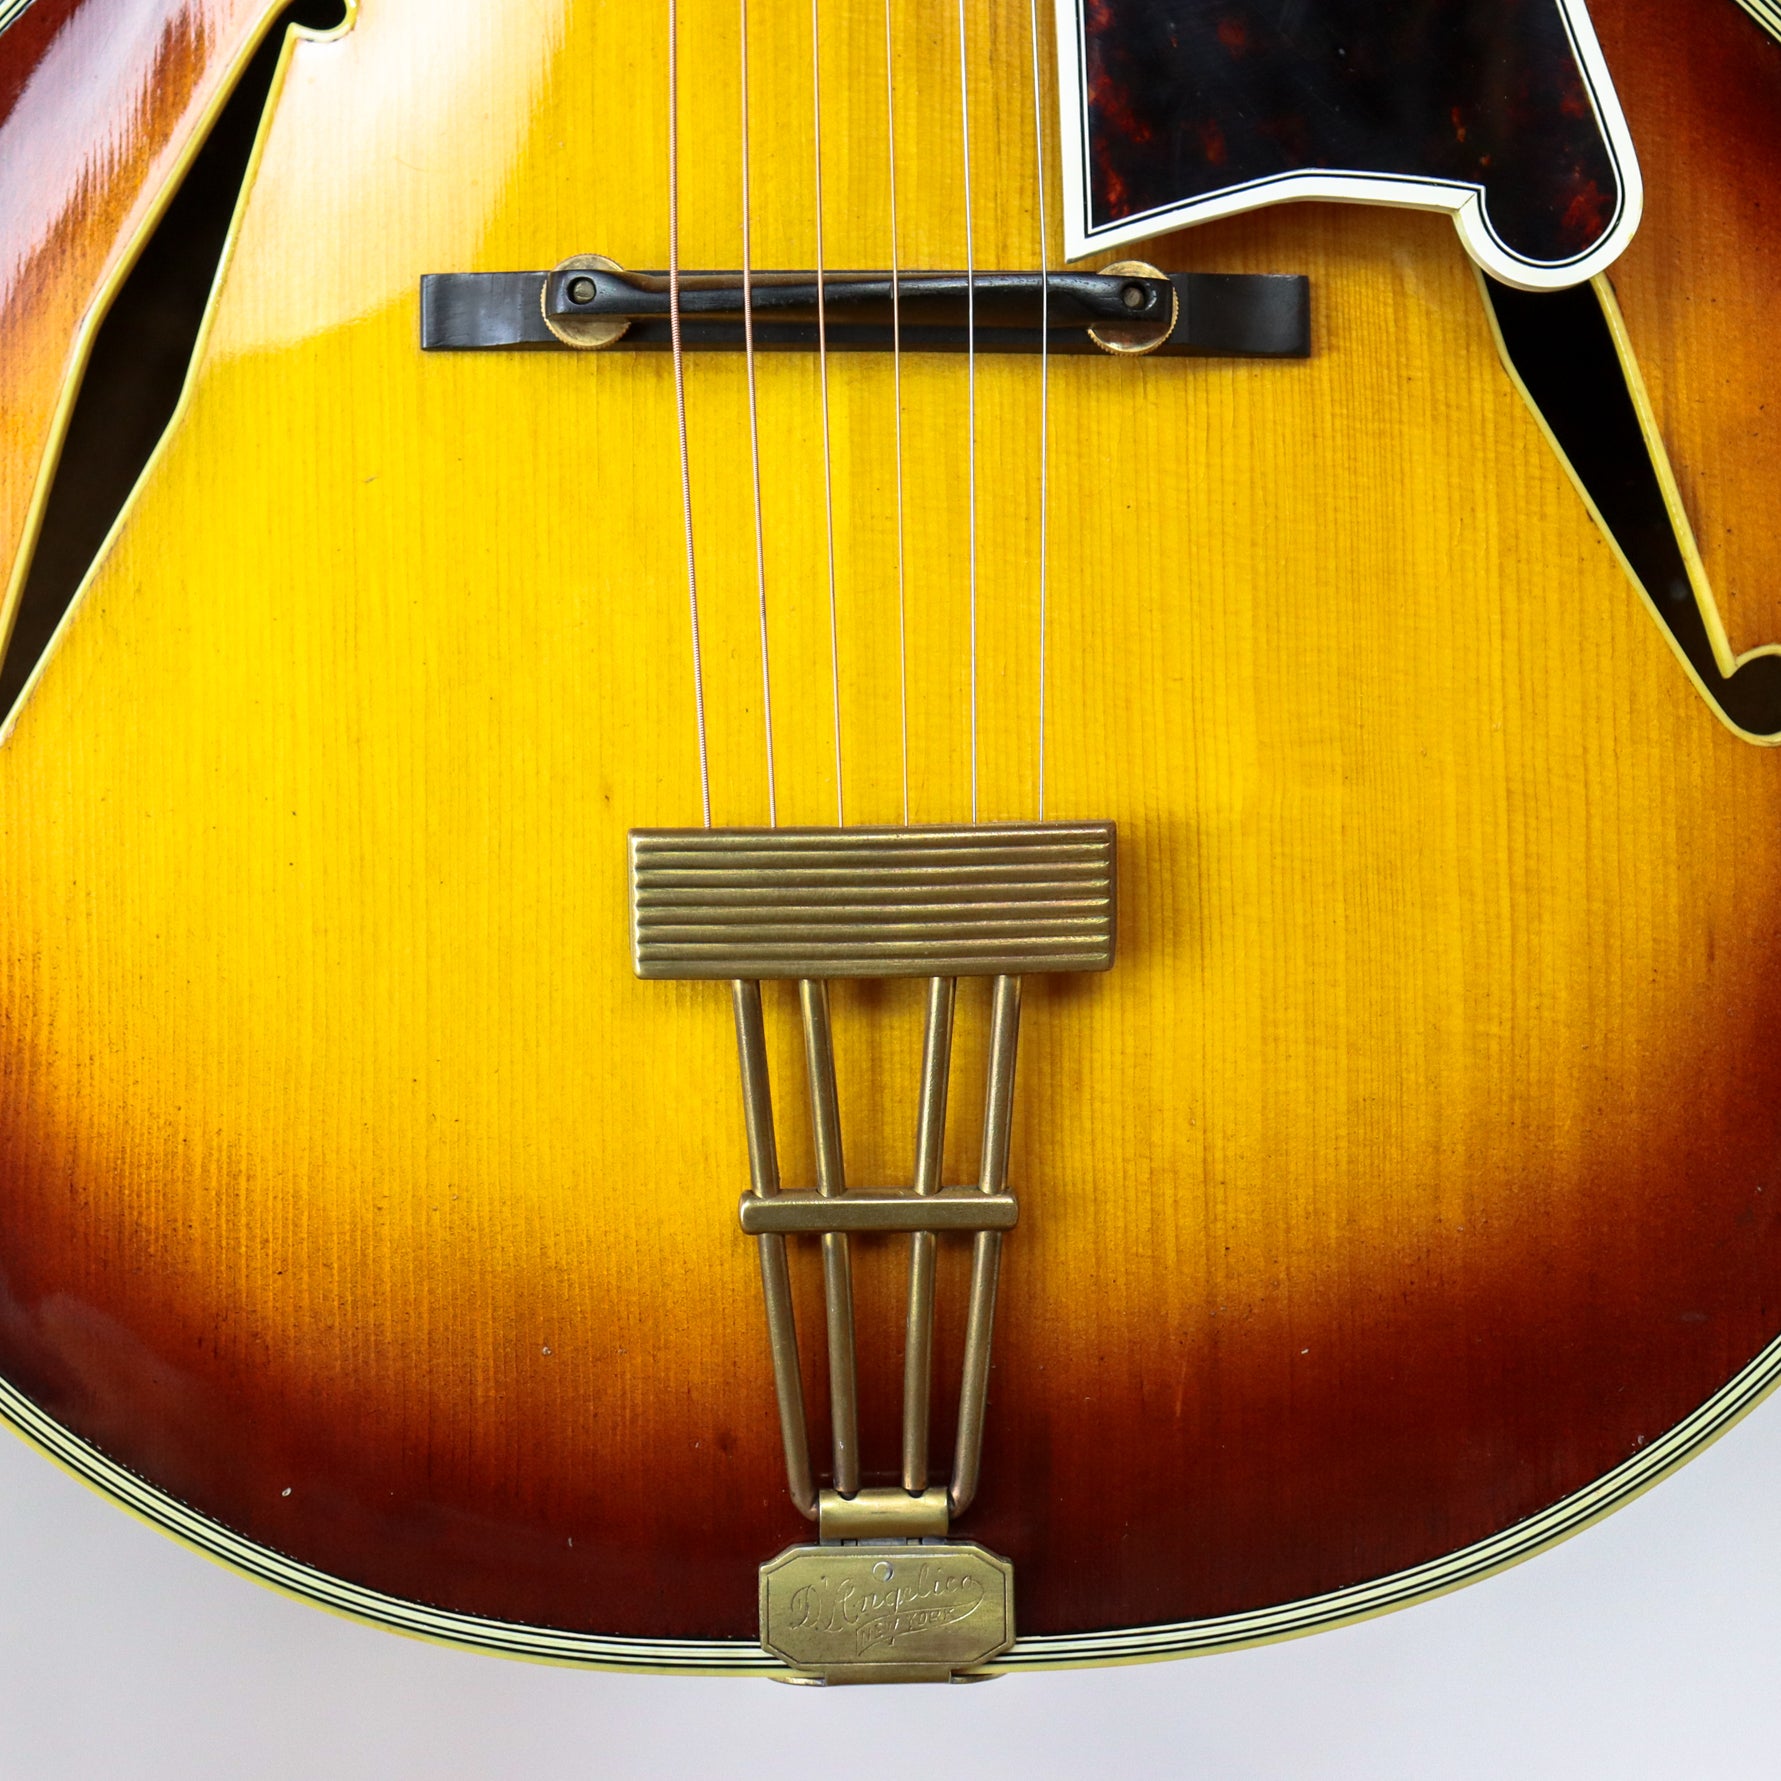 D'Angelico 1936 Excel 17" SN# 1189 with Hardshell Case